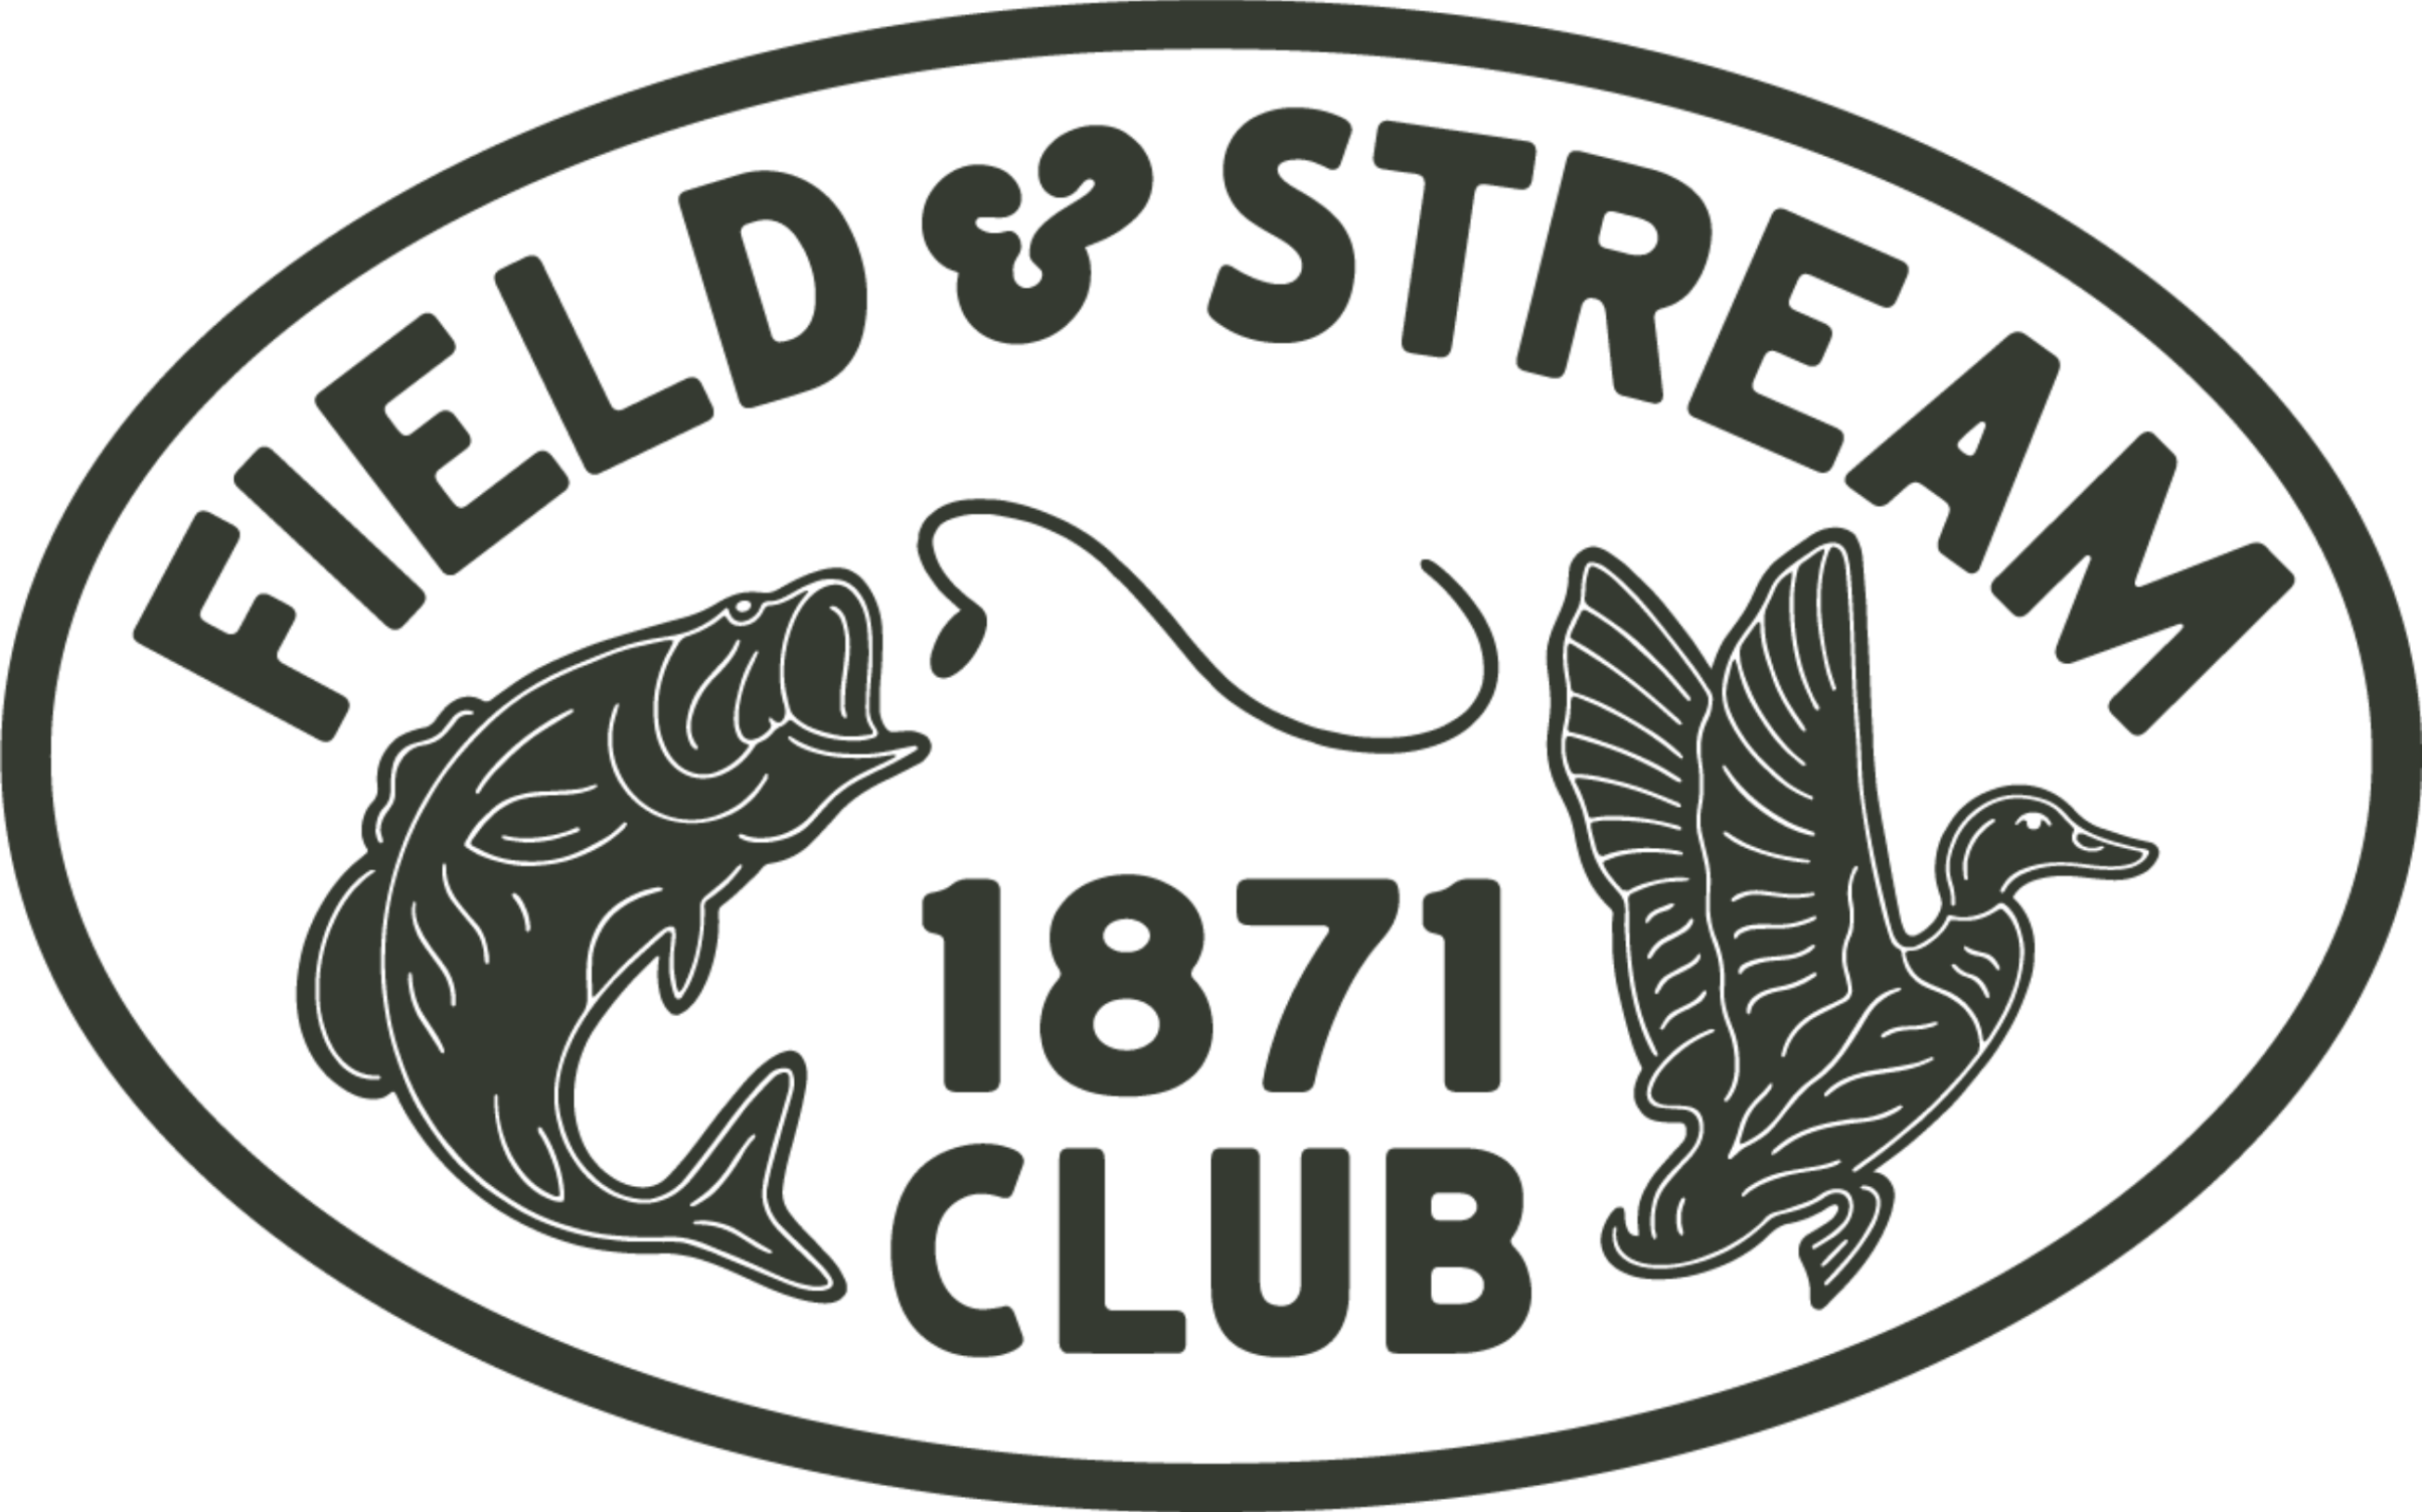 Field & Stream 1871 Club Logo with a bass and duck inside an oval